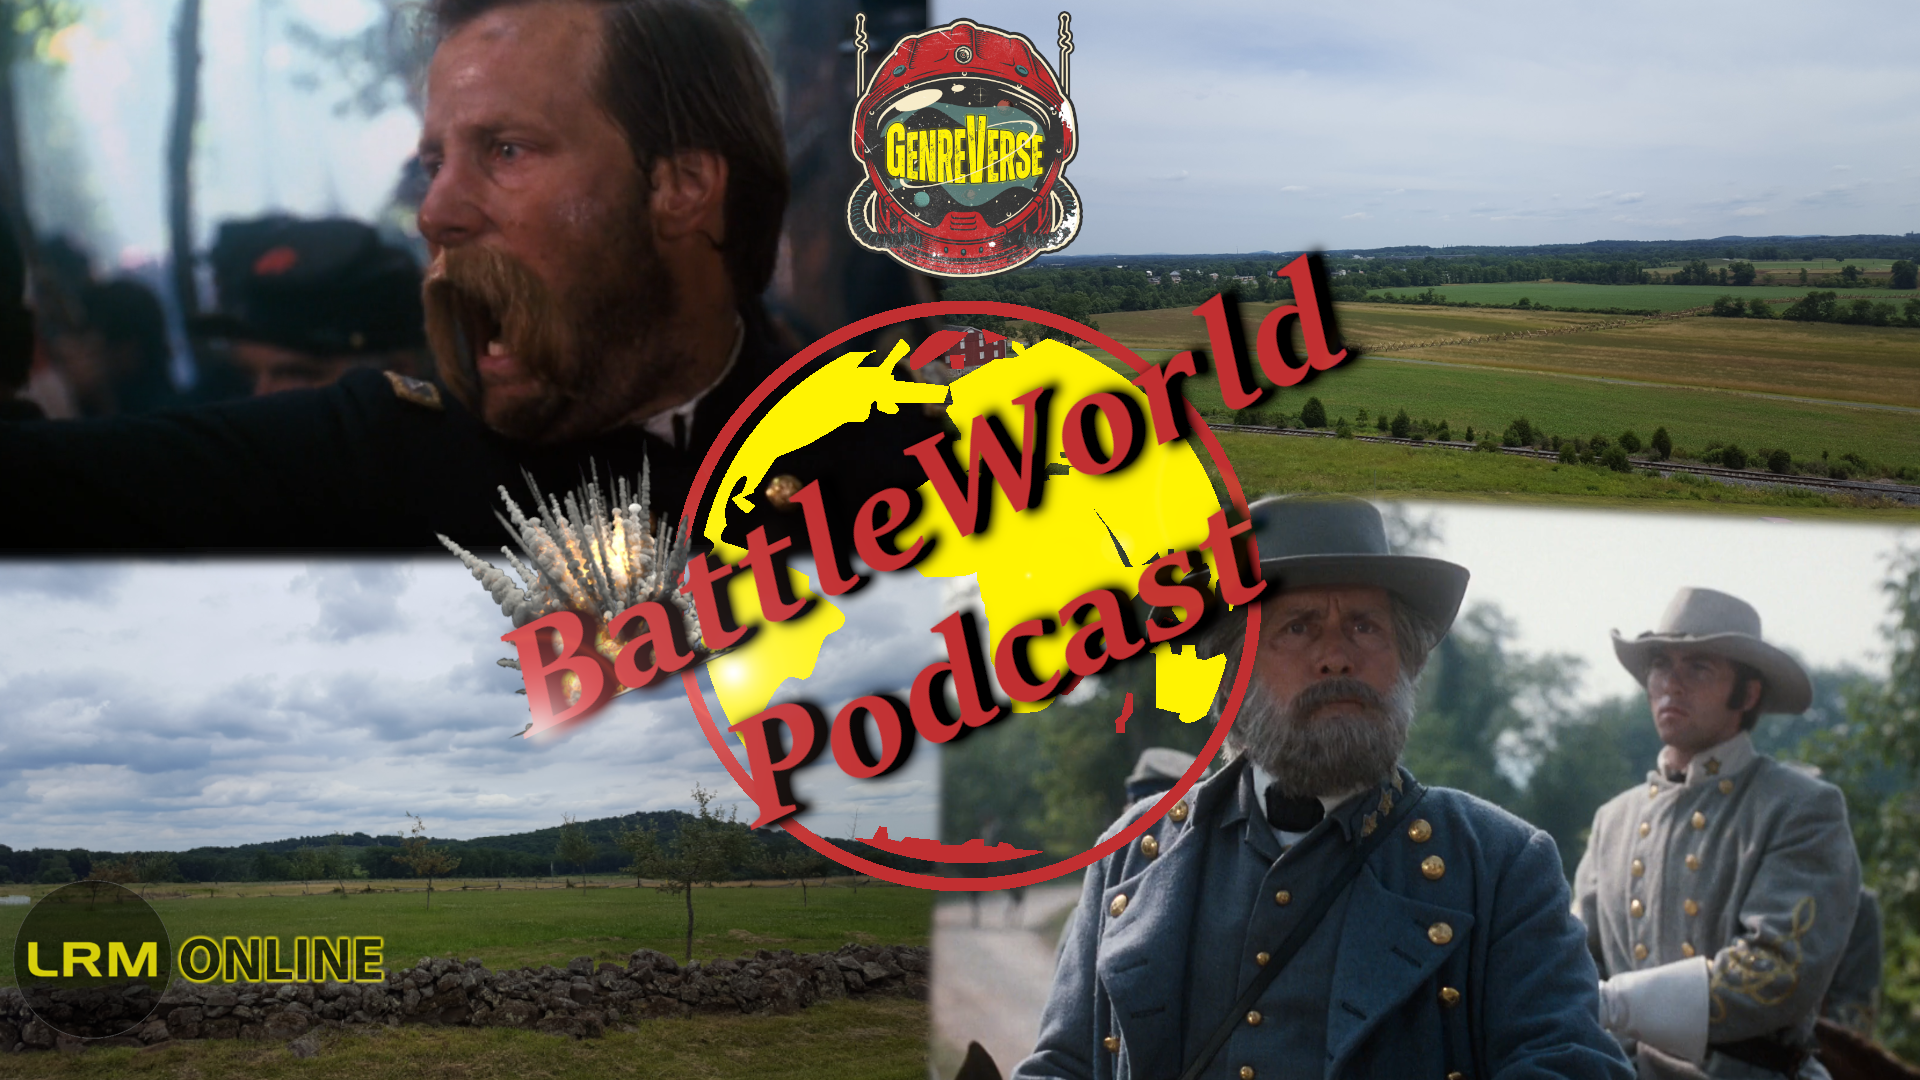 Gettysburg review a historical drama that dives into america, the soldier, and why one fights 158 year anniversary battleworld podcast 7-3-21